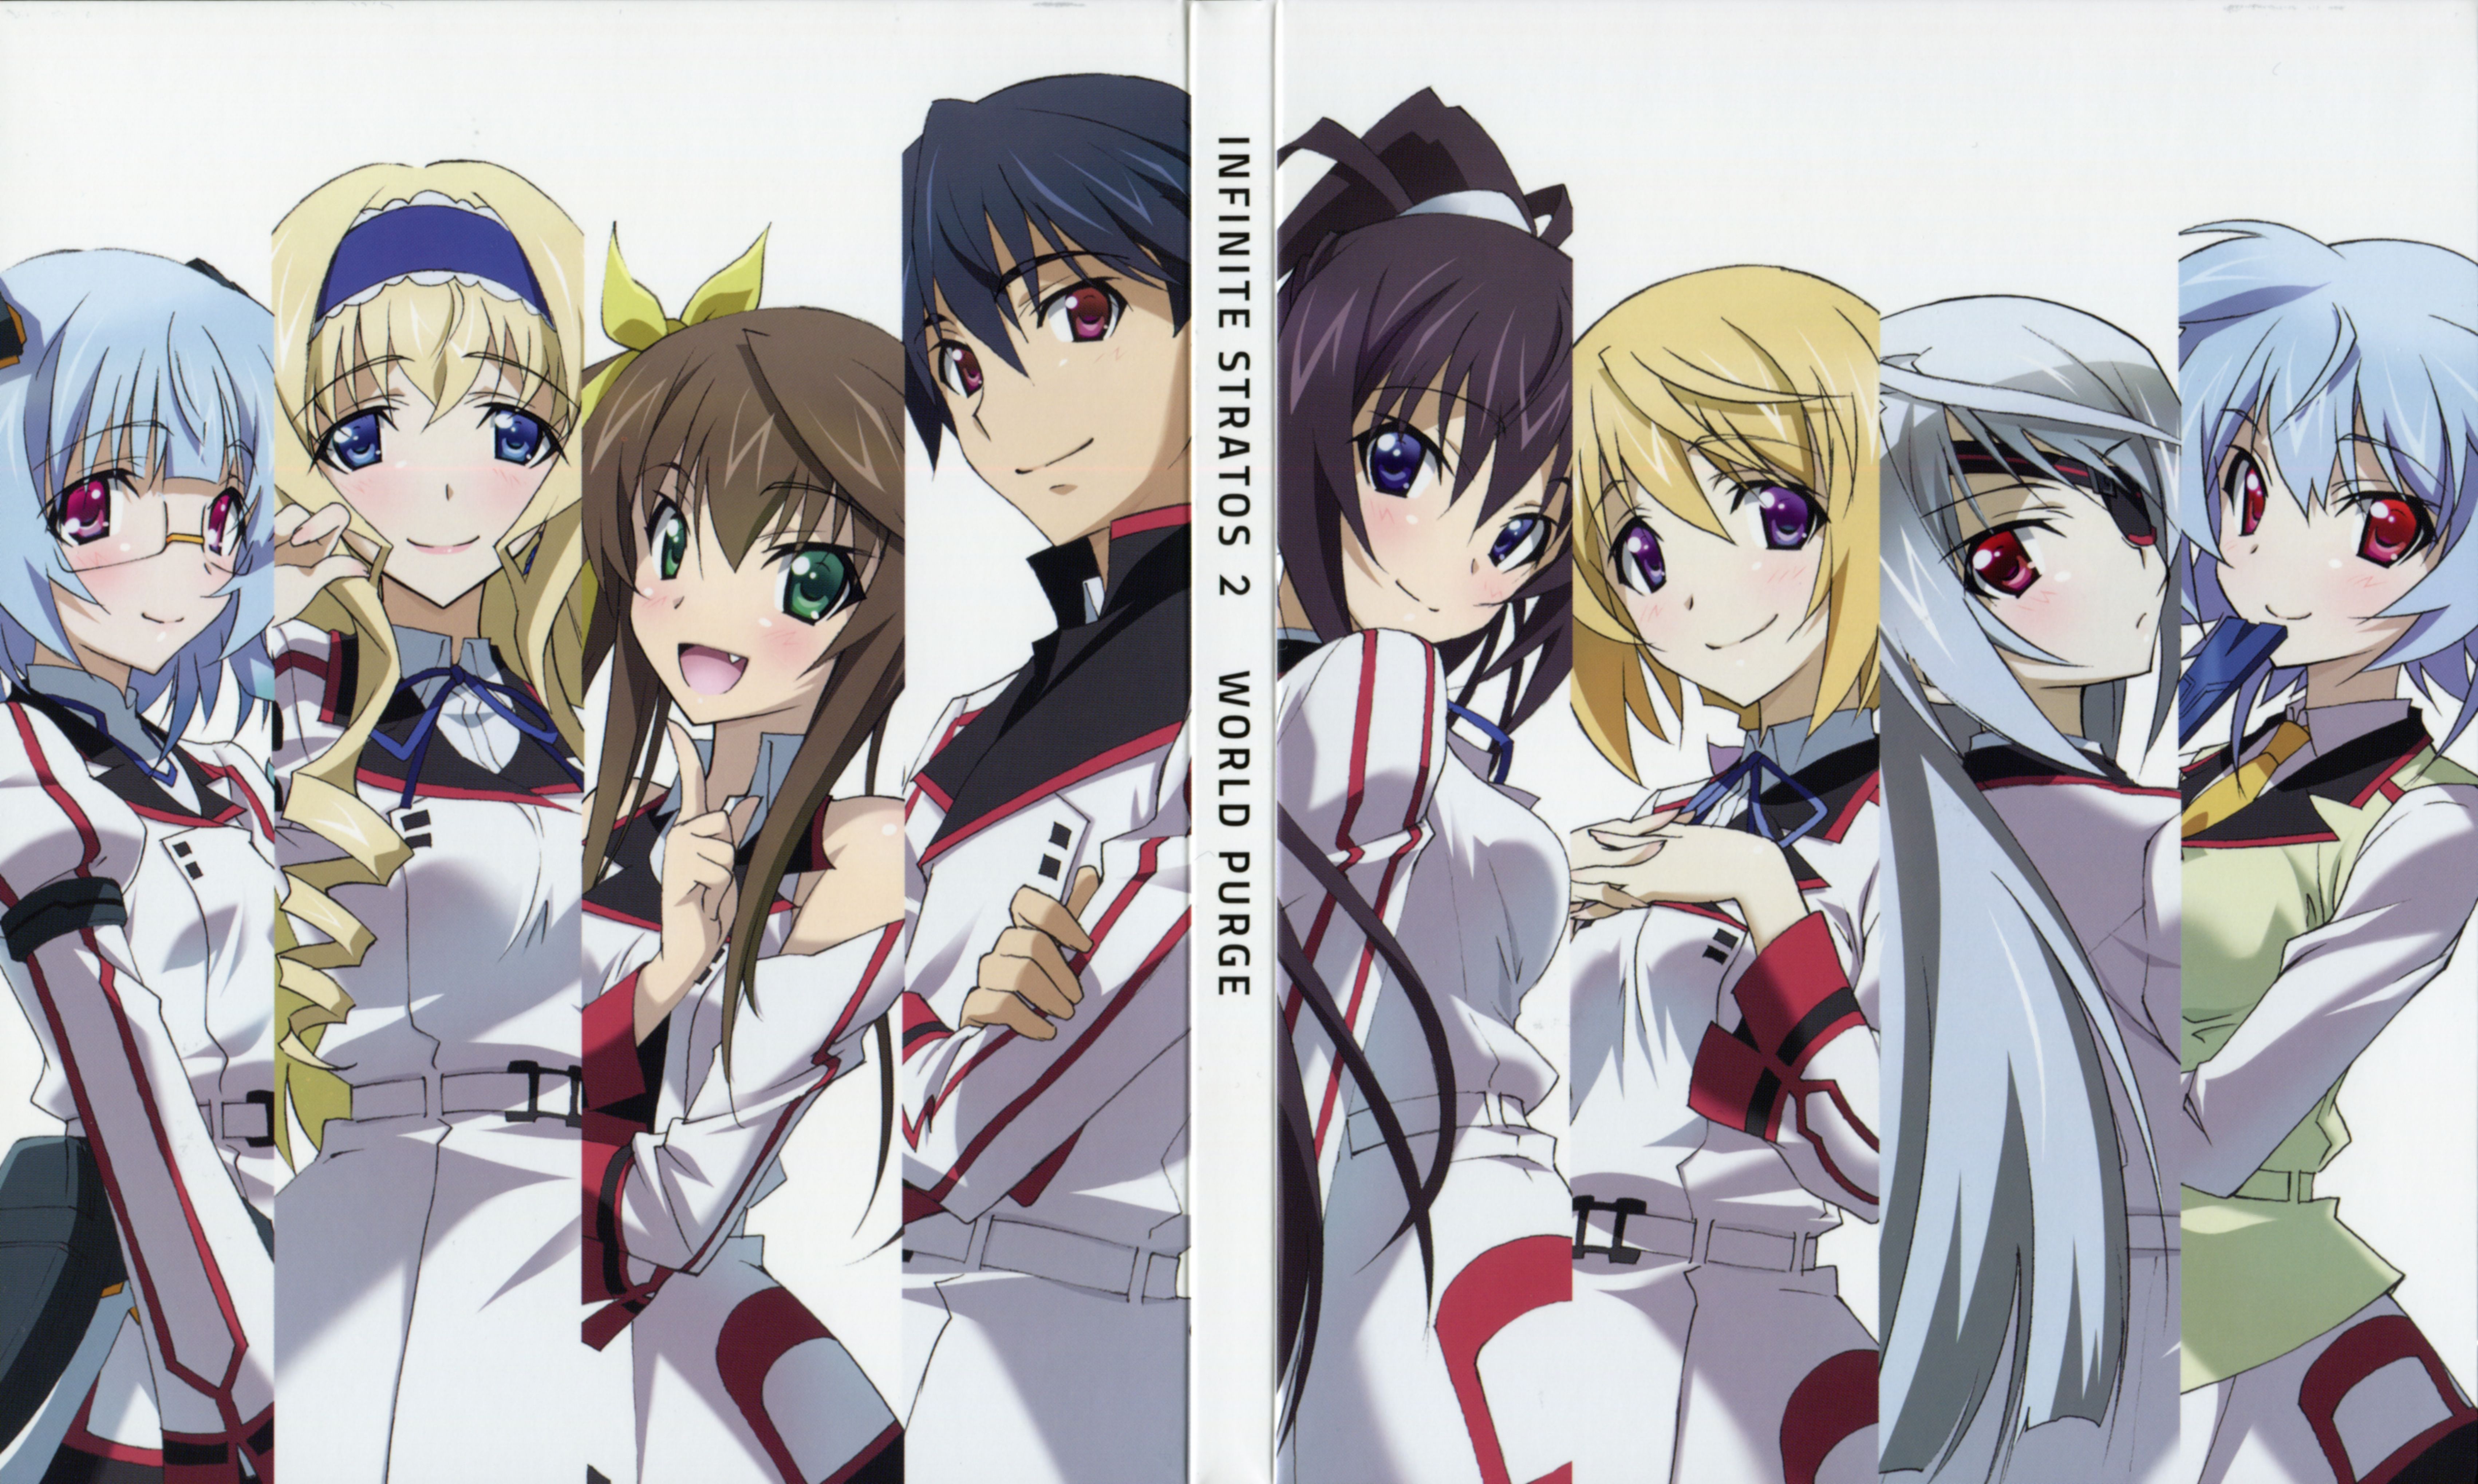 IS: Infinite Stratos 2 - Other & Anime Background Wallpapers on